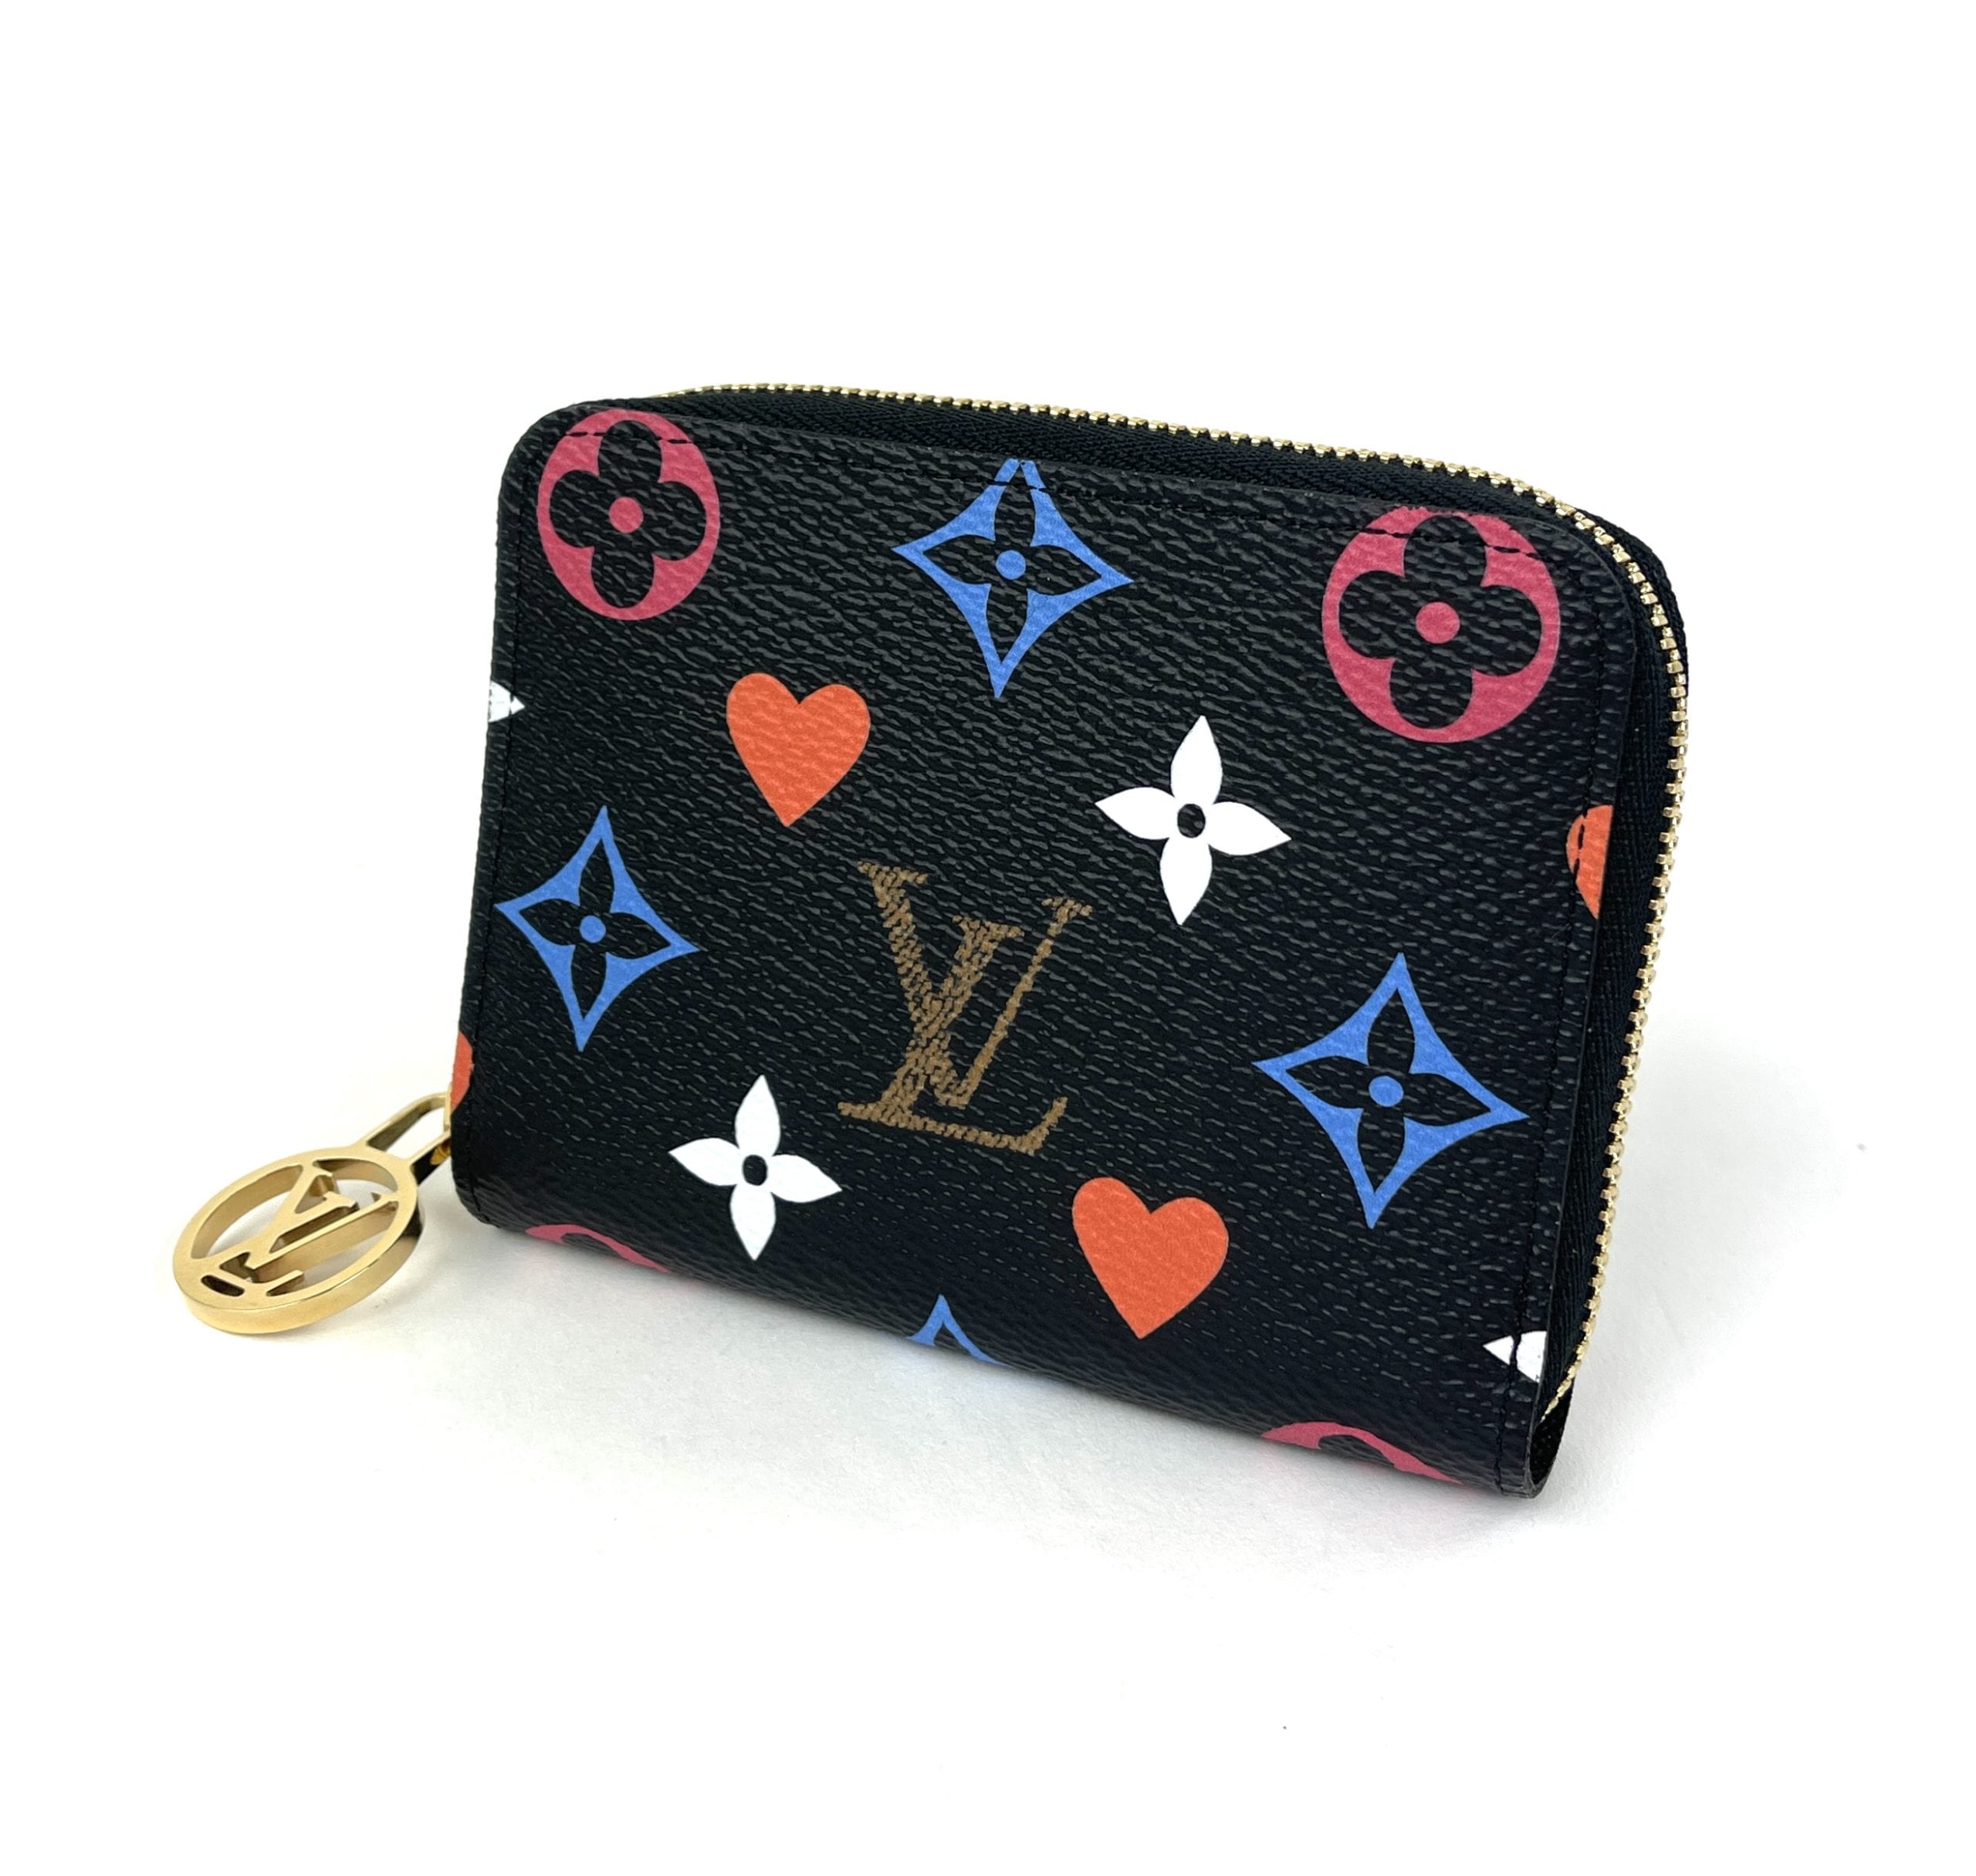 Louis Vuitton Game On Collection Reviewed